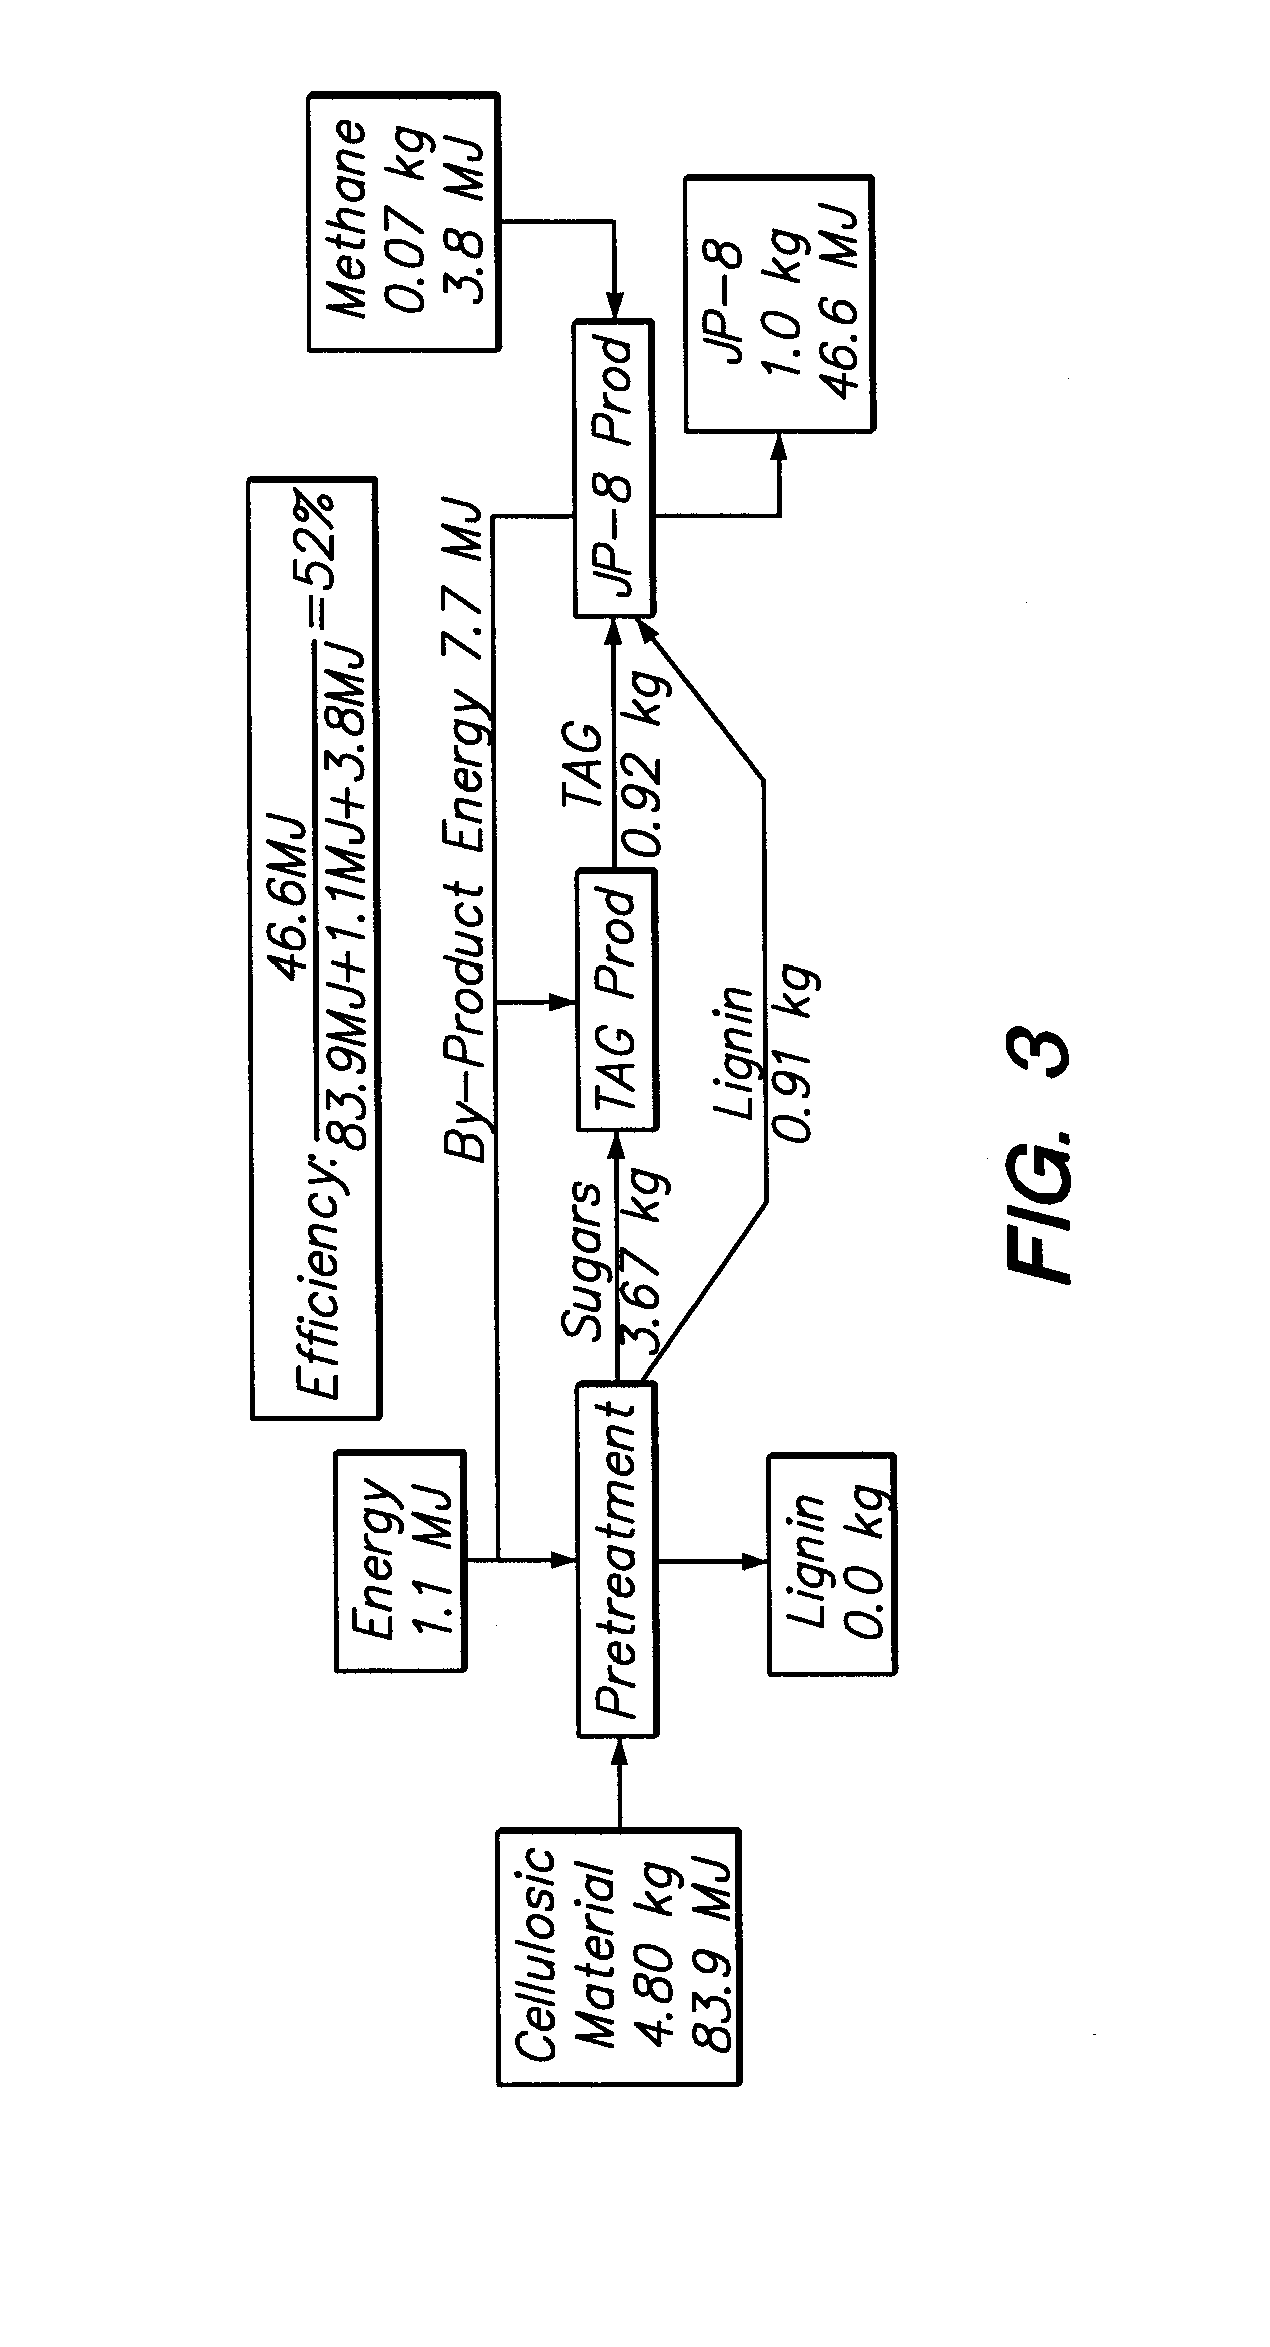 Method and system for microbial conversion of cellulose to fuel